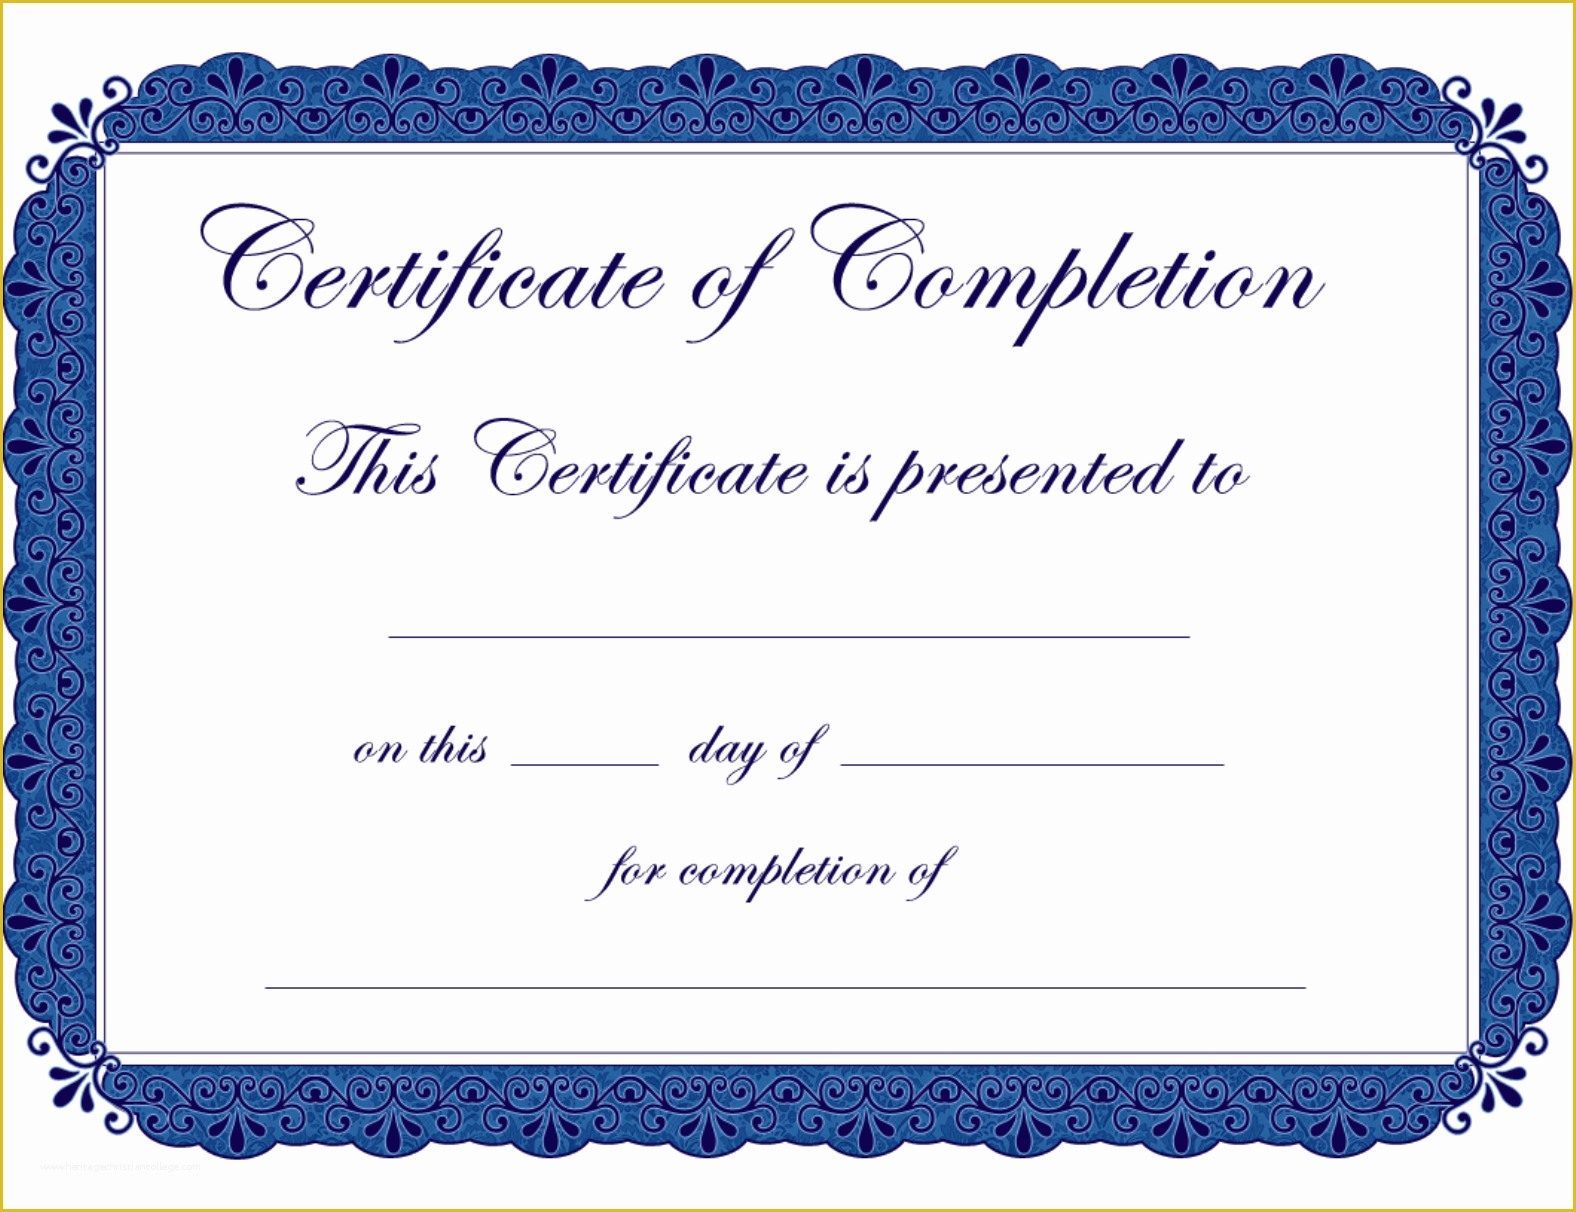 35 Free Premarital Counseling Certificate Of Completion Template